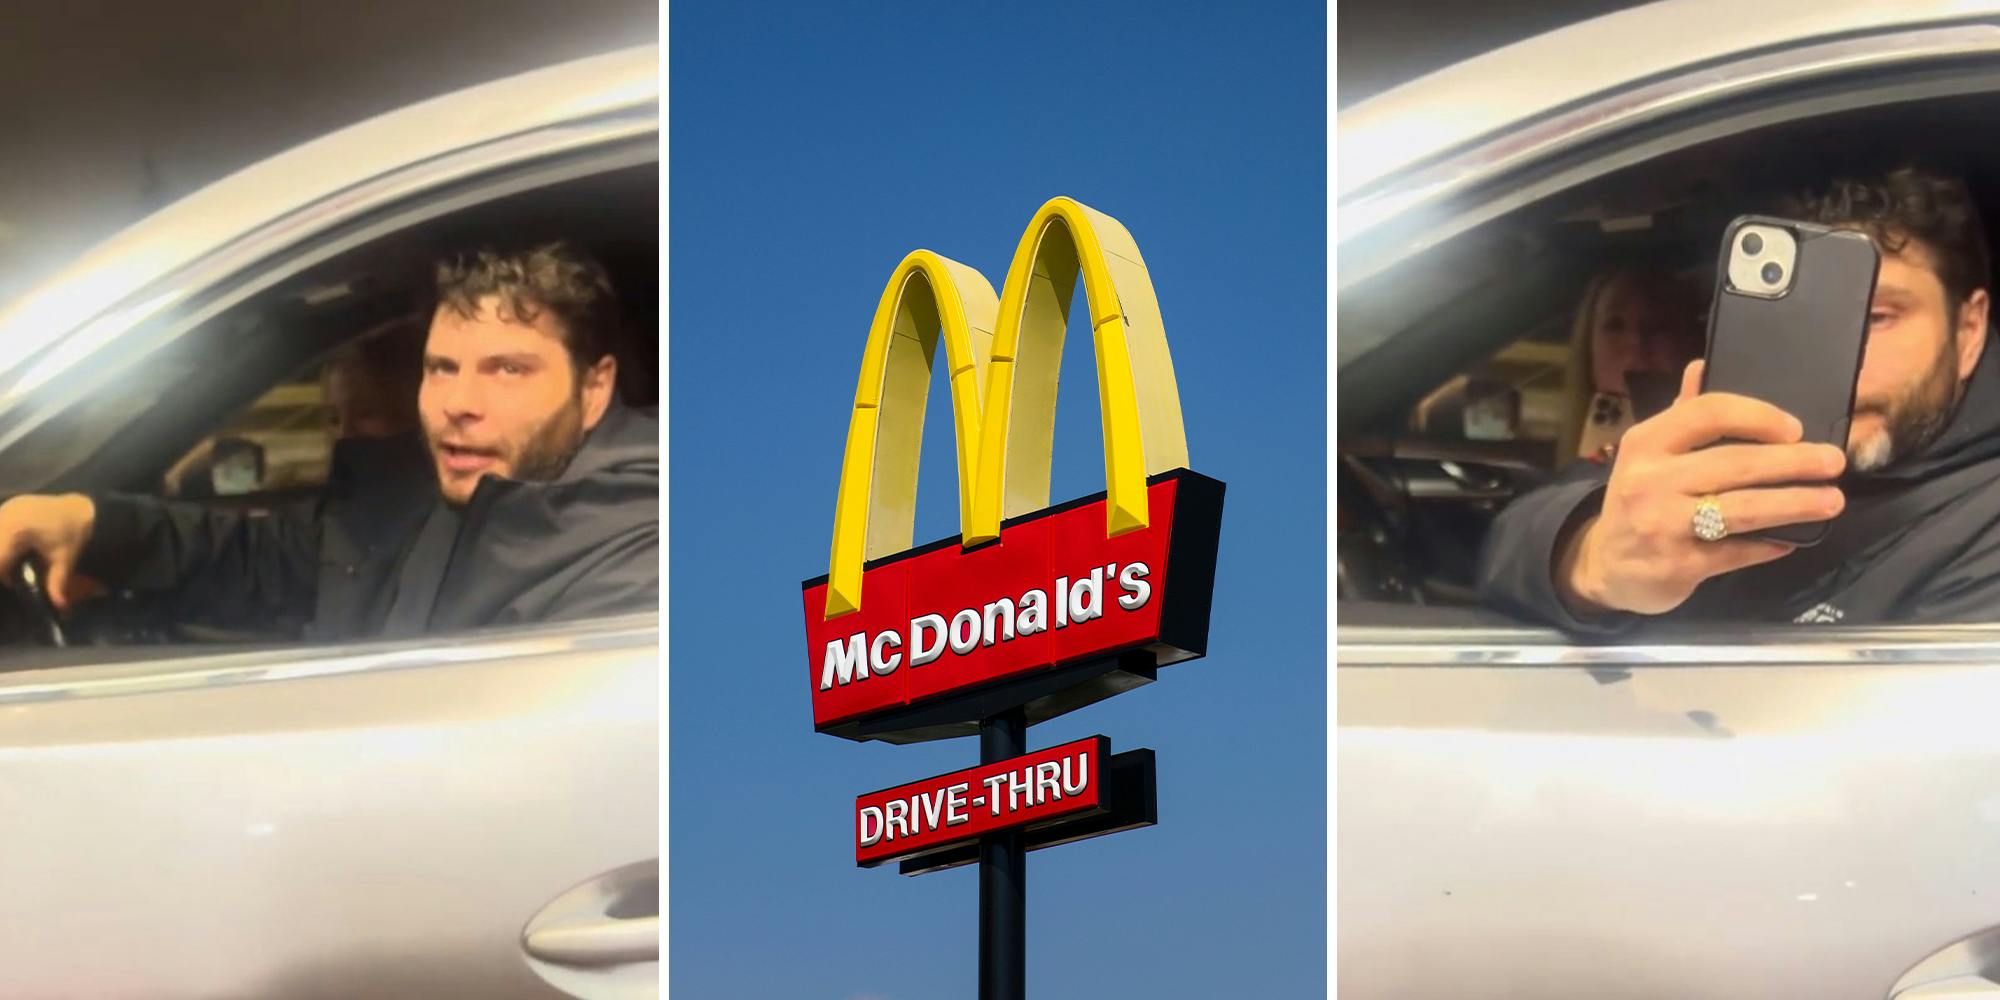 McDonald’s customer calls out drive-thru worker who asks him to park and wait for his order